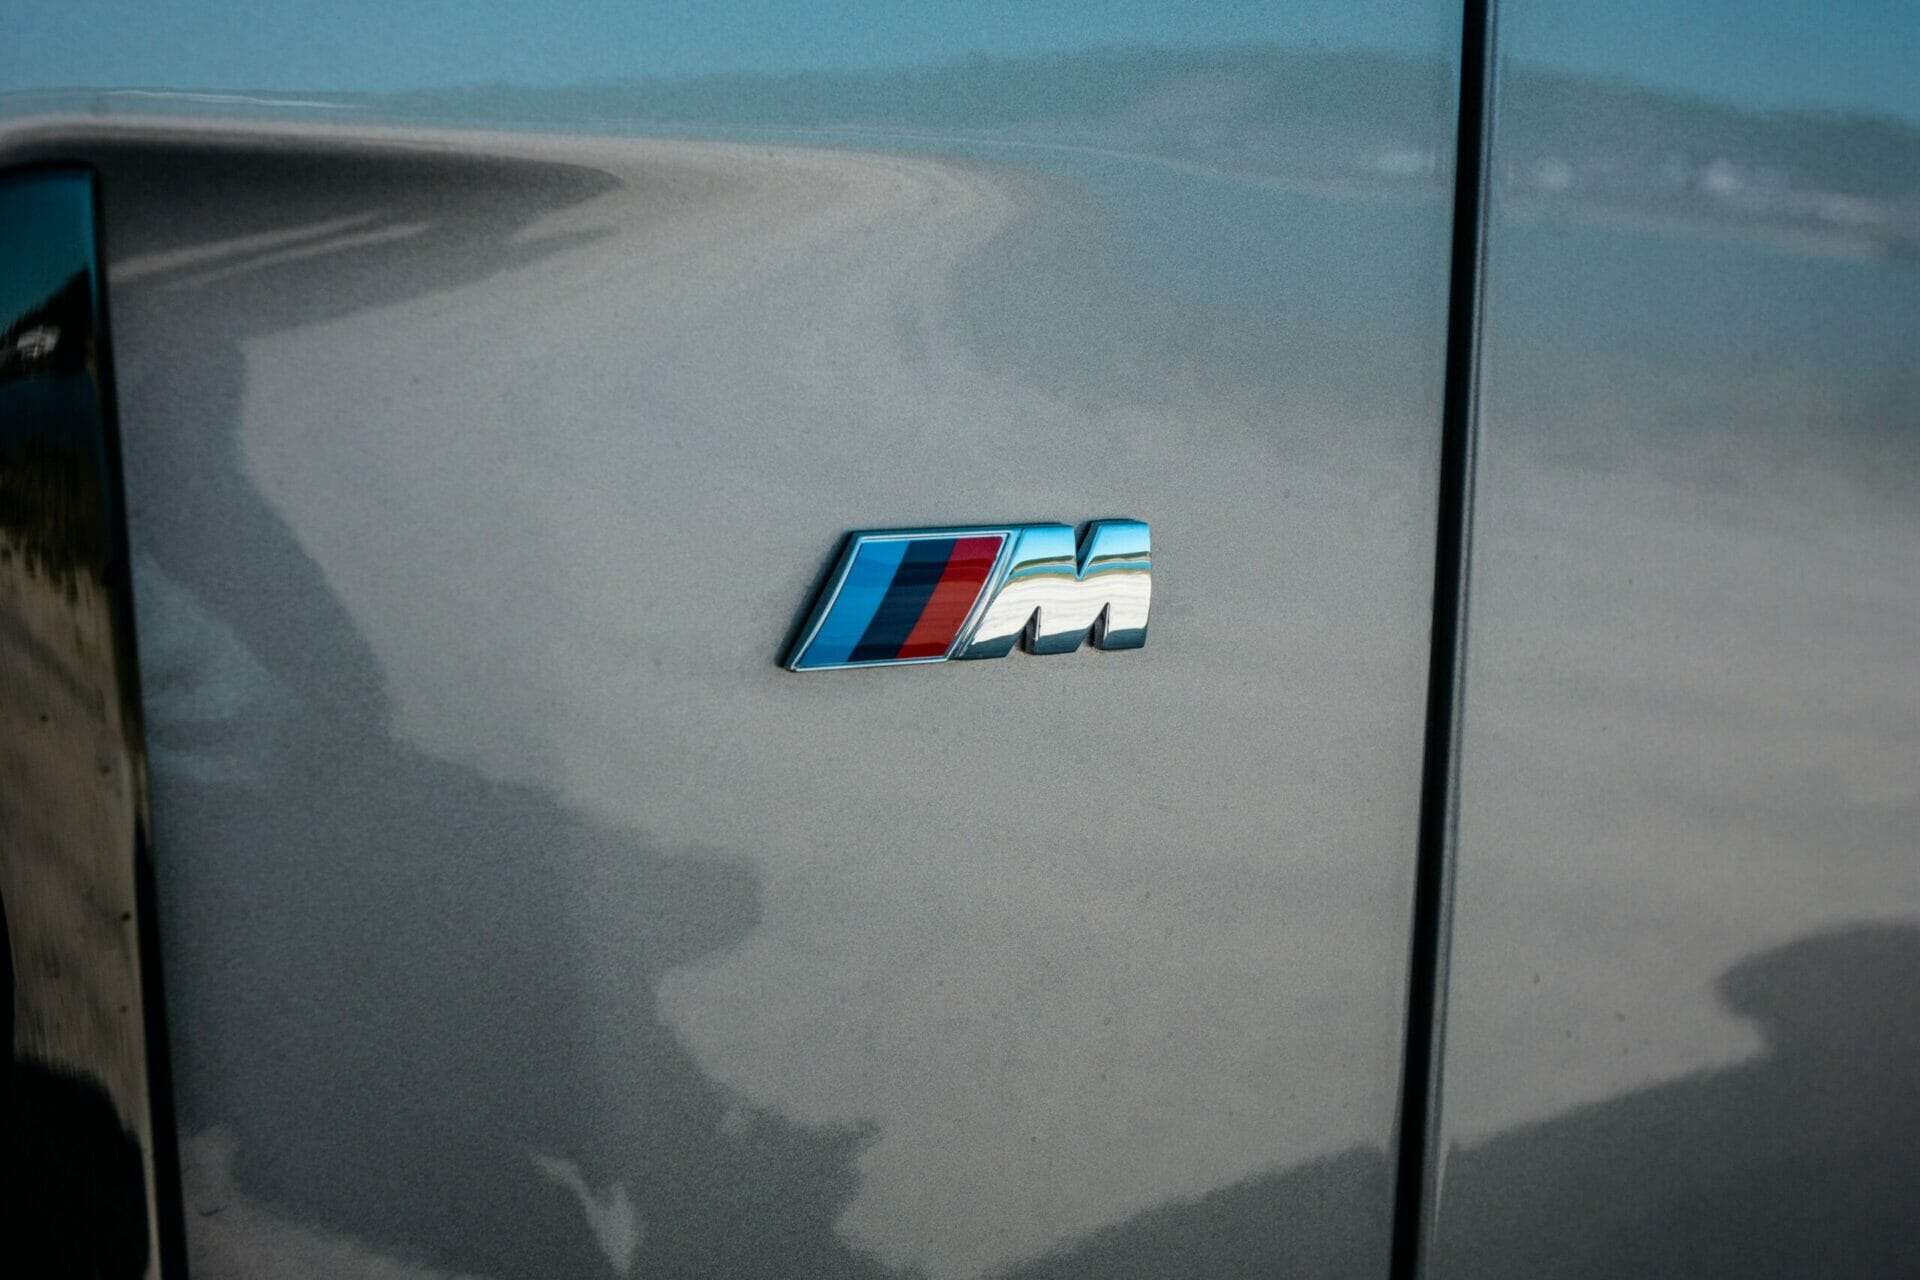 What do you know about the BMW car brand?